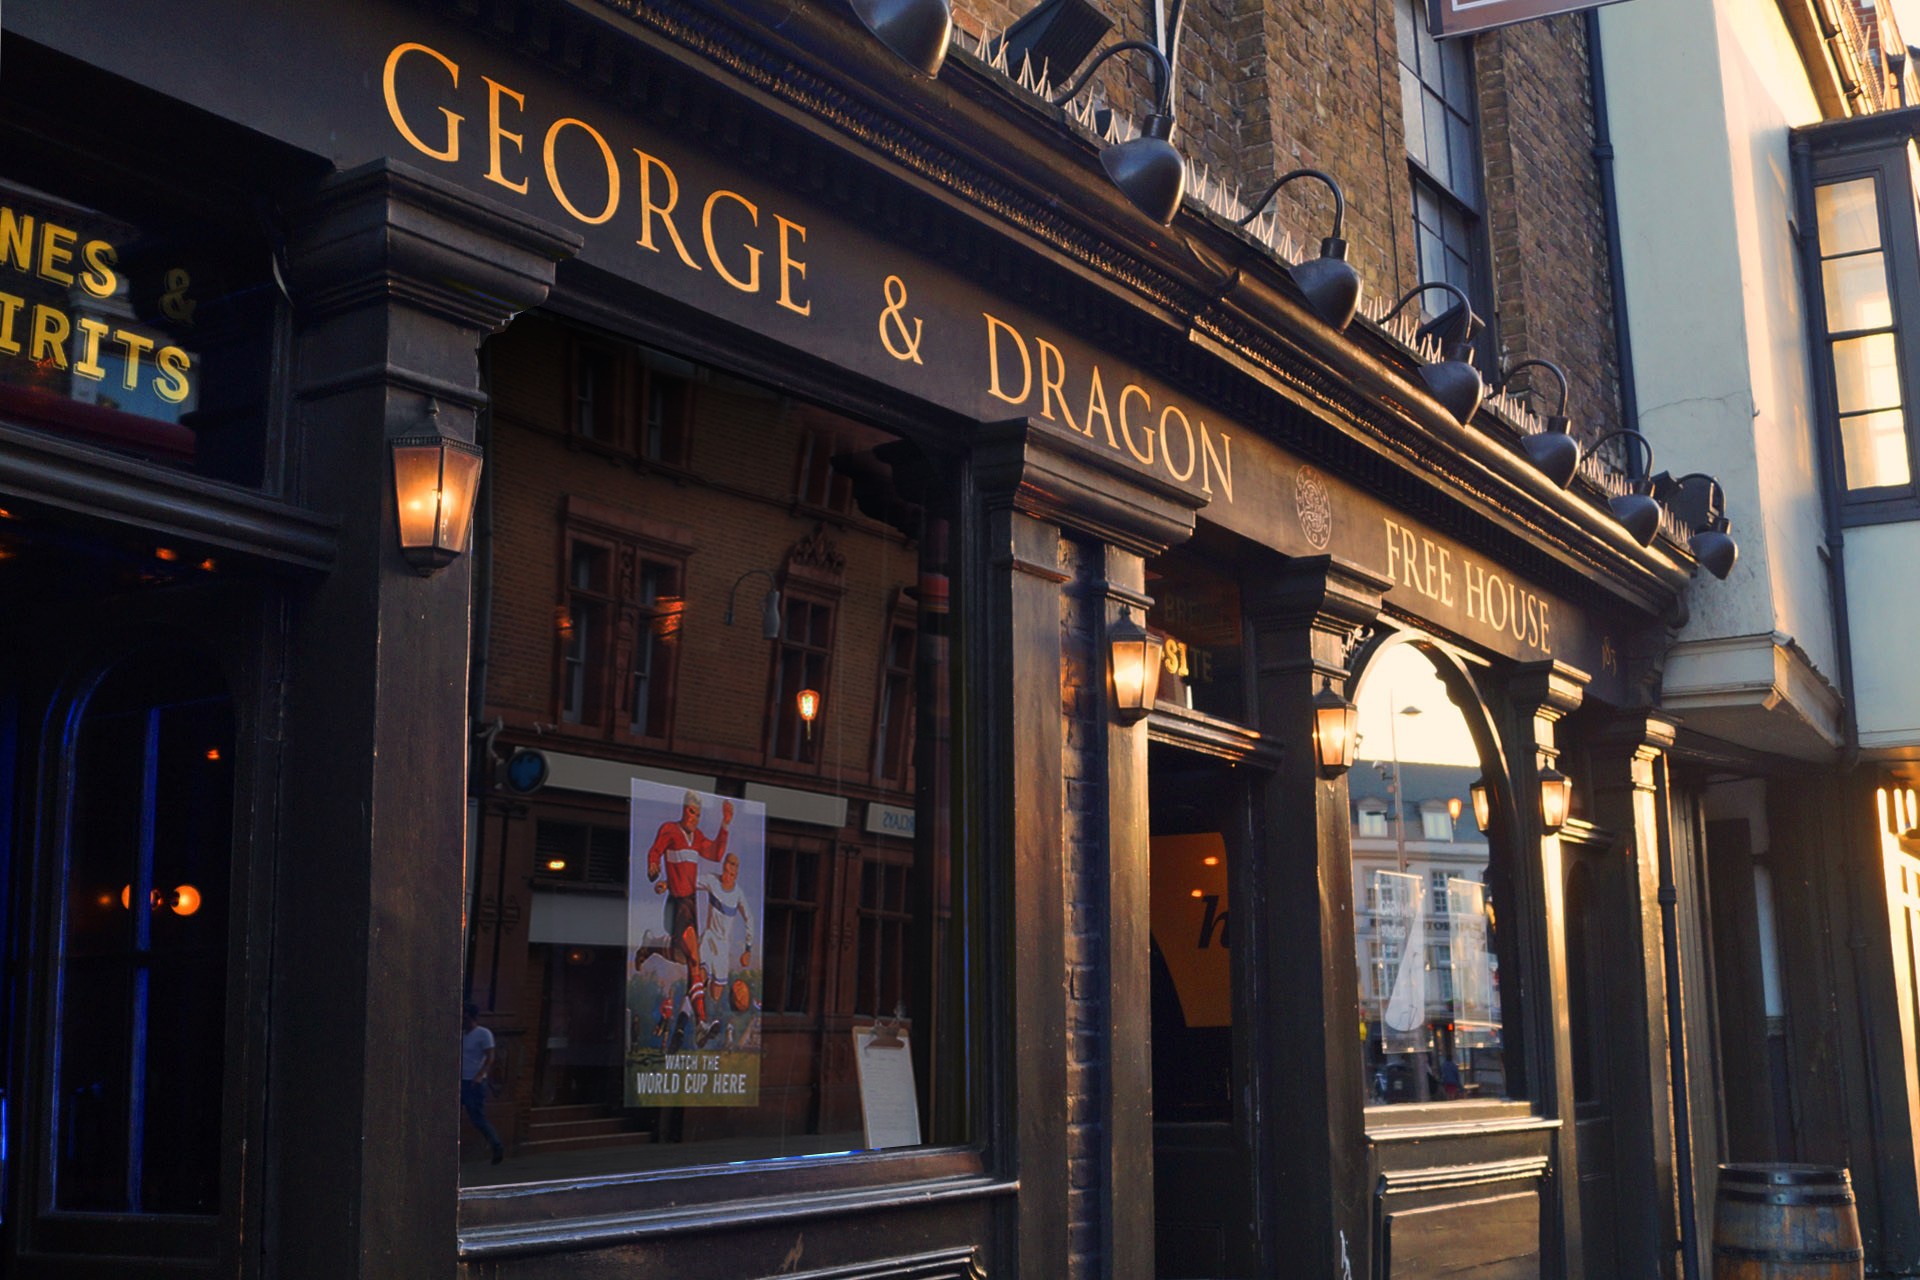 The George and Dragon Pub